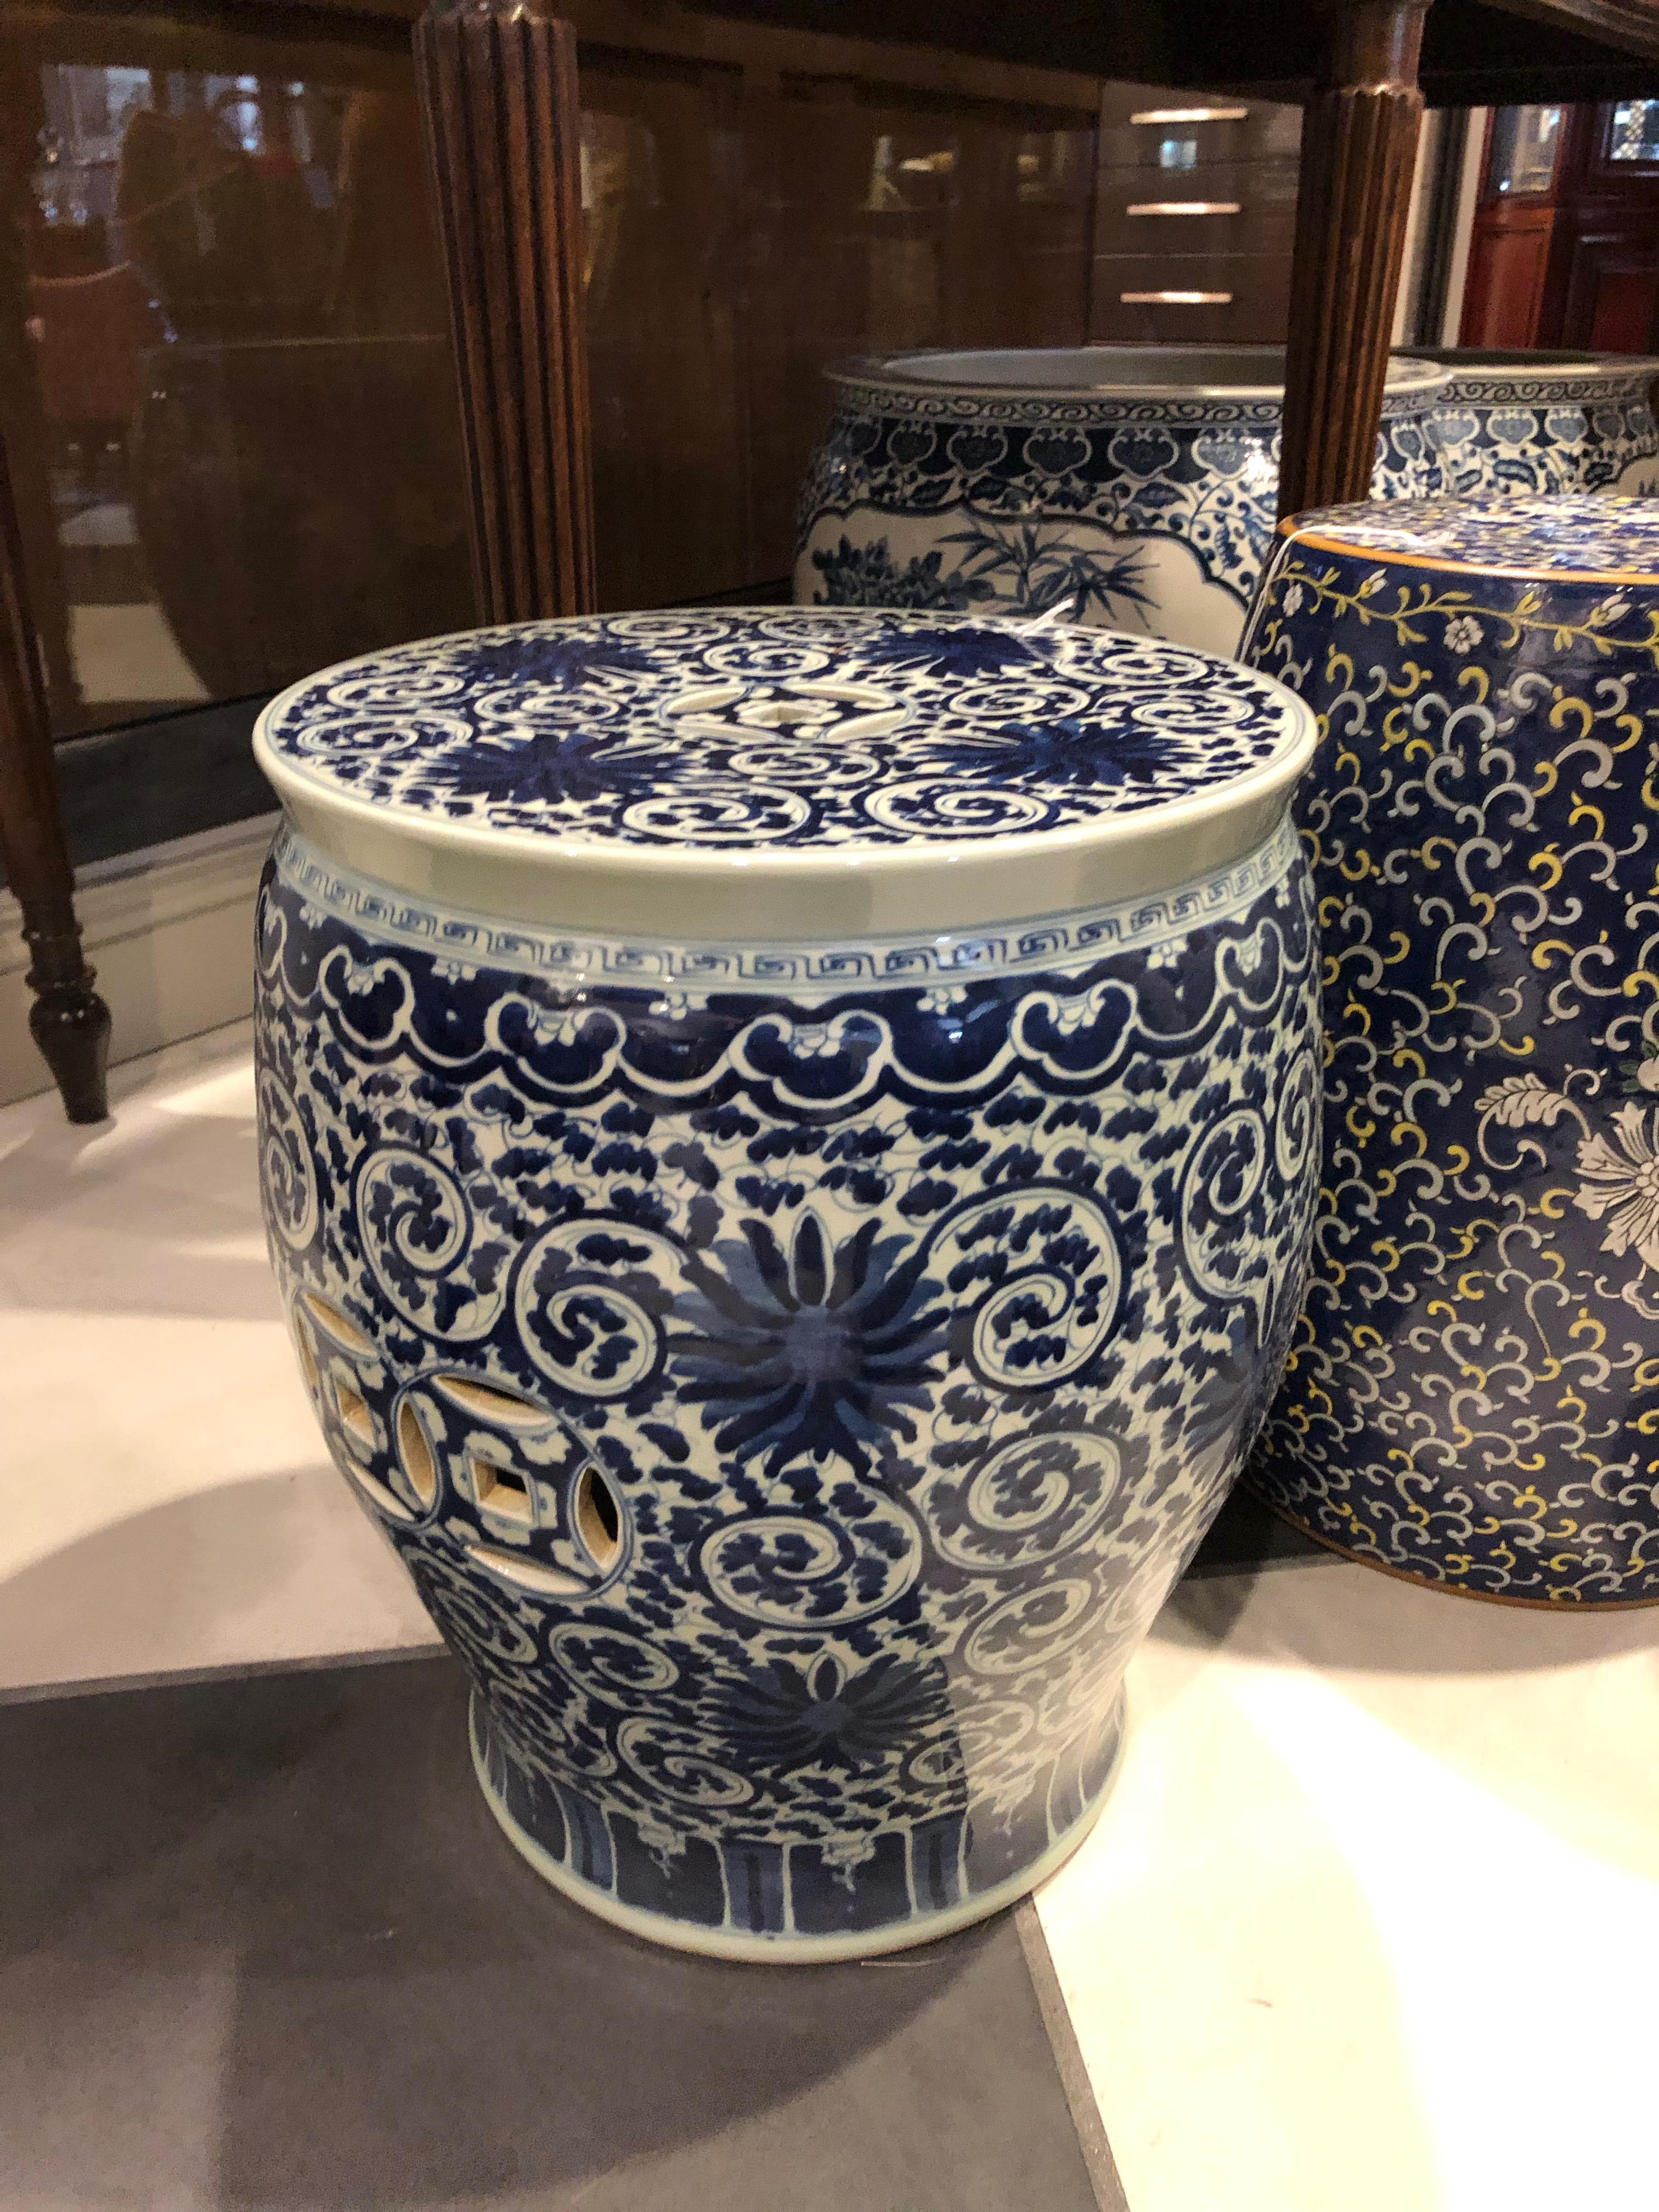 Three Chinese garden stools hand painting all the same size all the same price each garden stool is $1,275.00

Measures: 1 in blue and white 19 x 14 x 14
1 in more dark blue and white 16.5x 15 x15
and 1 in more teal blue, yellow and white with